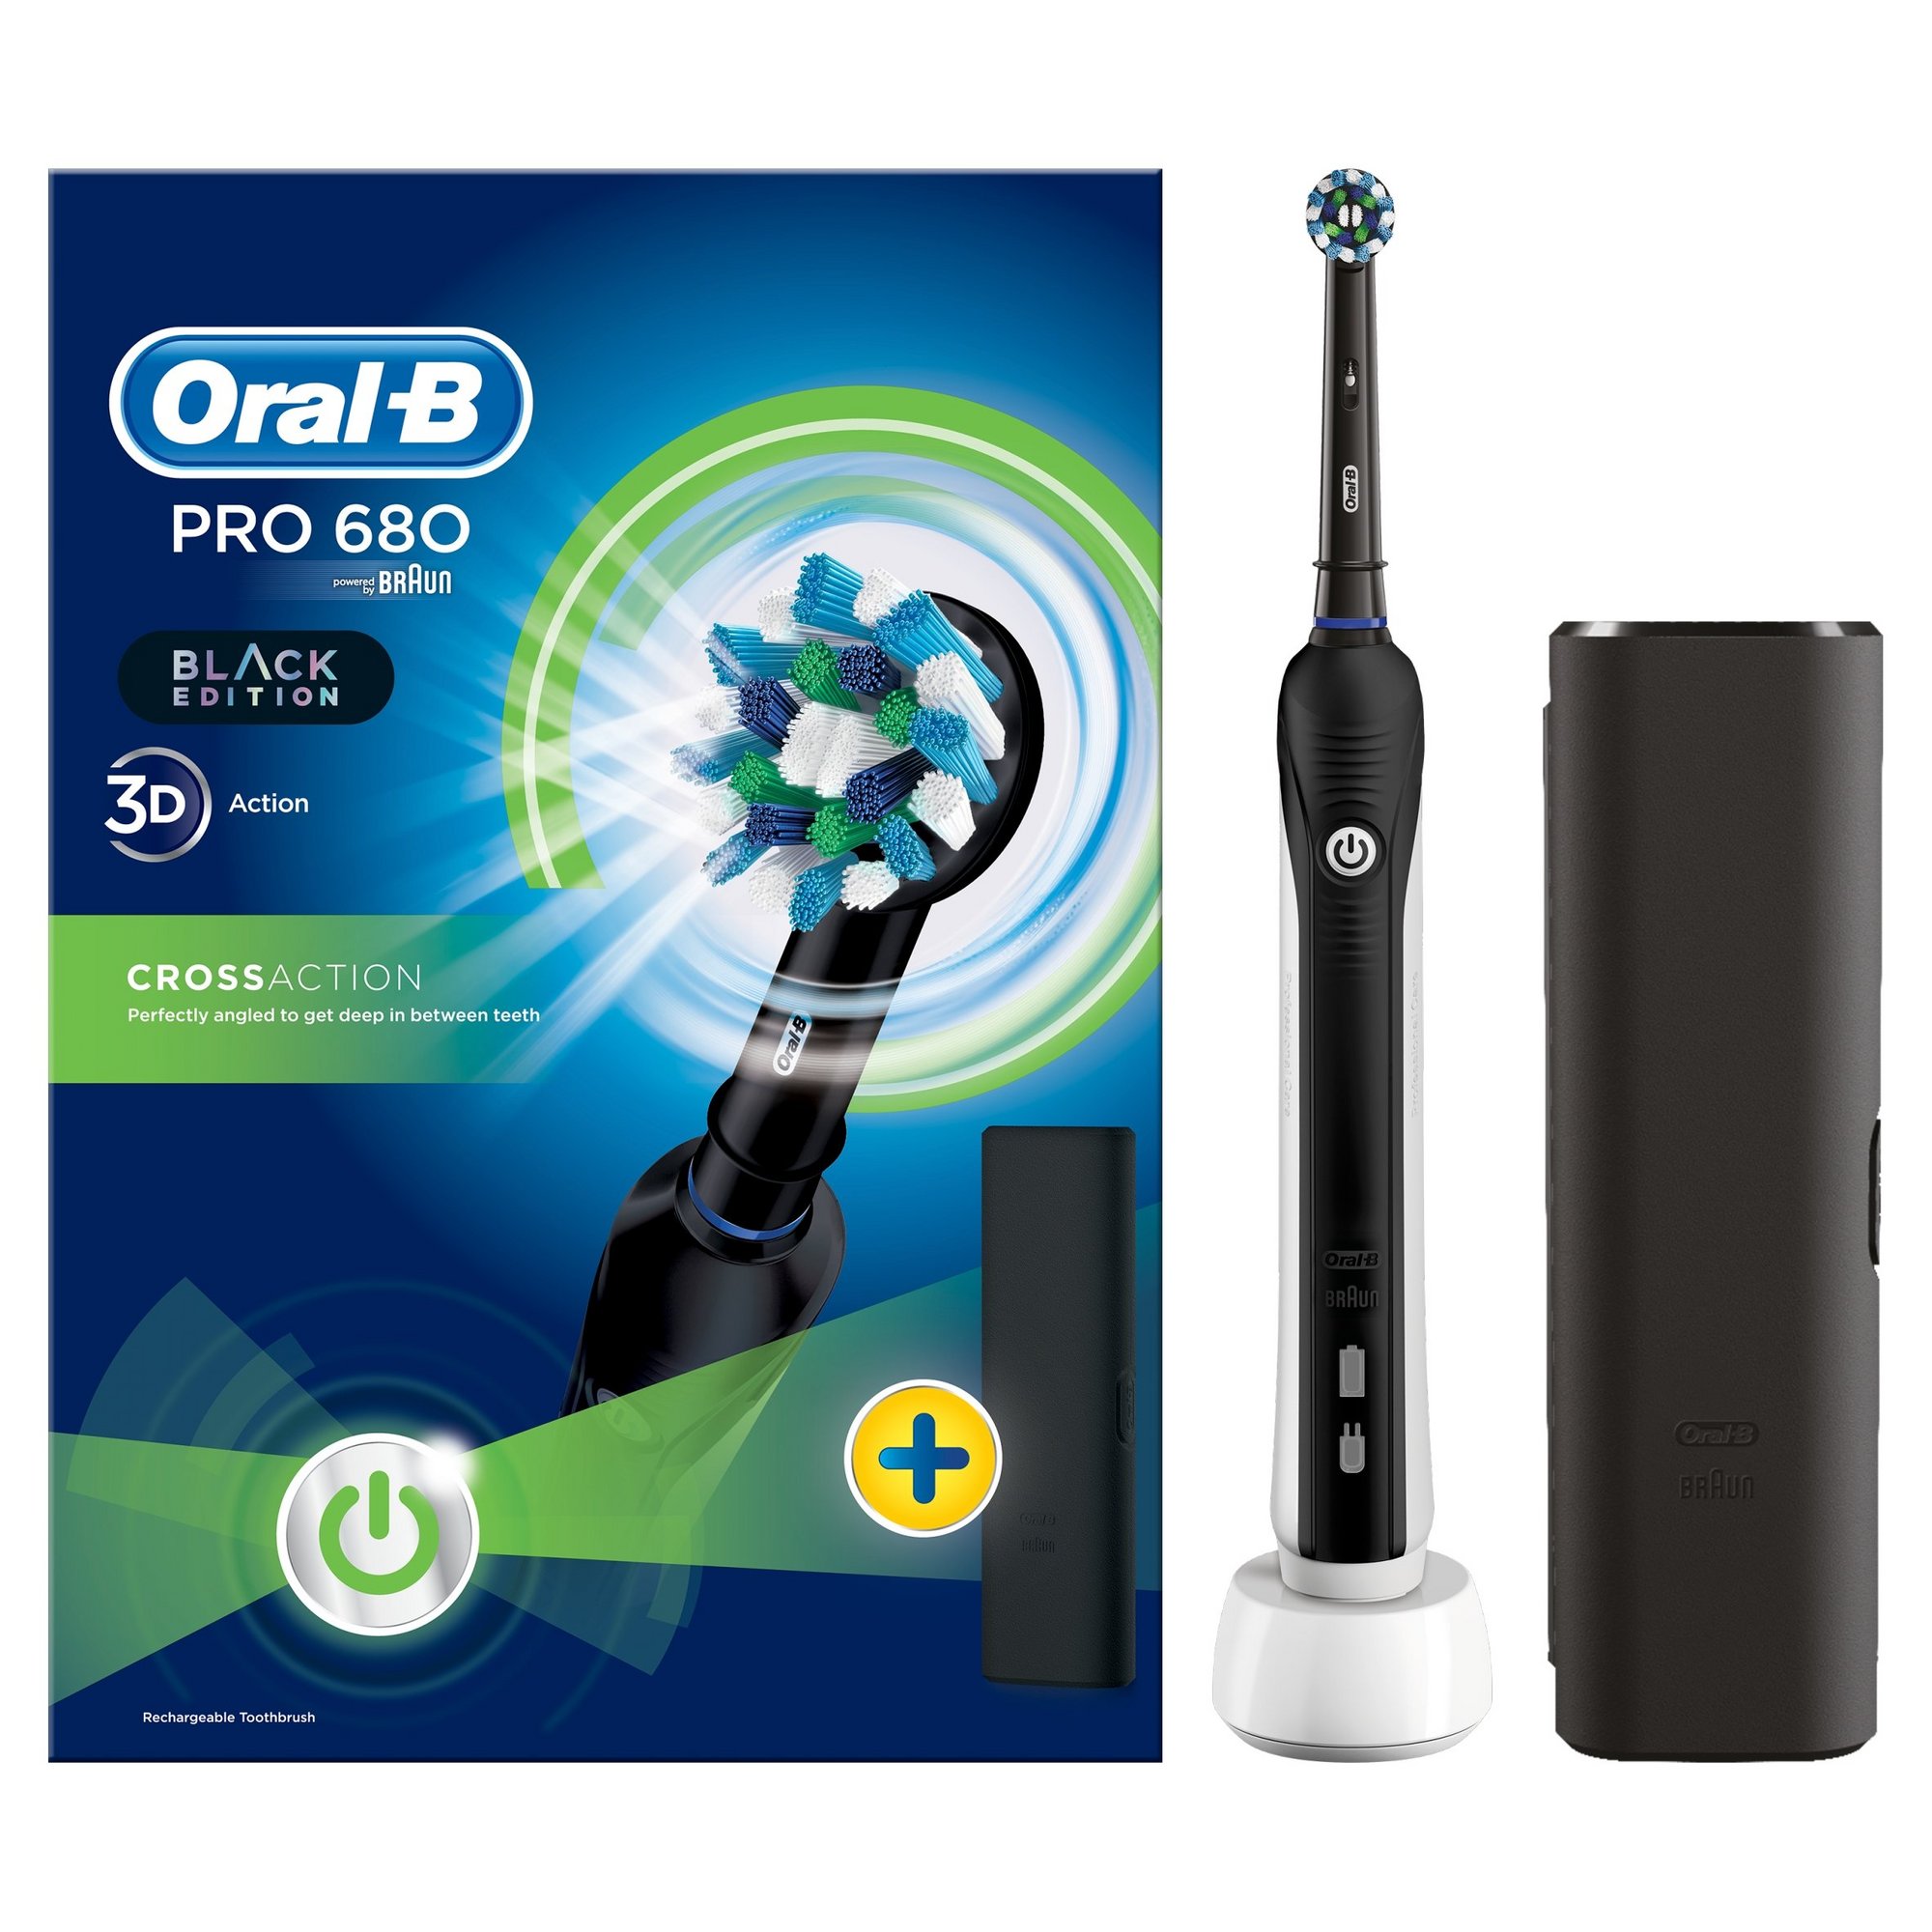 Oral B PRO680 Cross Action Toothbrush with Travel Case